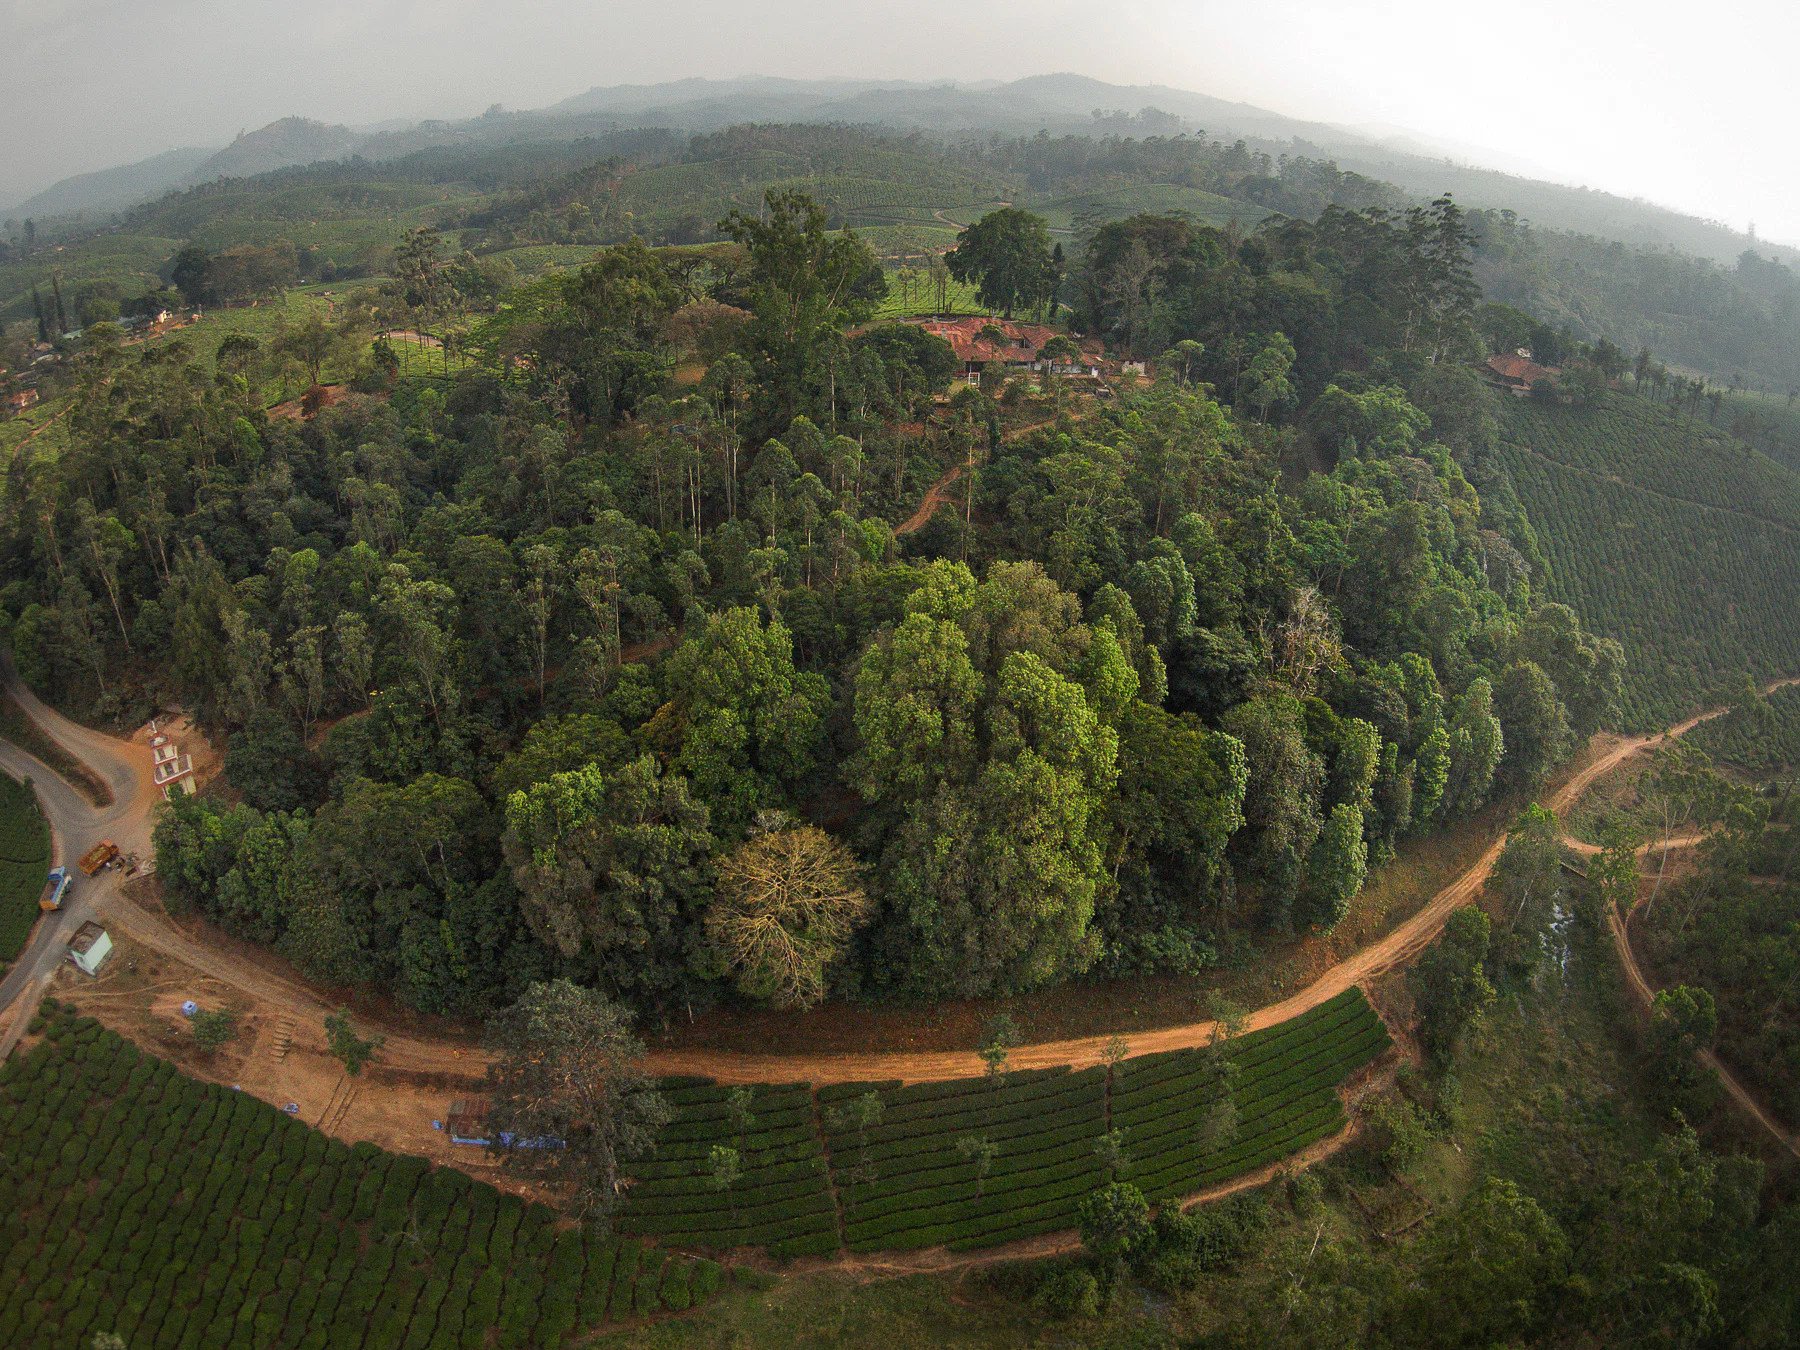 A restored rainforest fragment surrounded by tea plantations in the Anamalai hills of southern India. Photo:  Nature Conservation Foundation